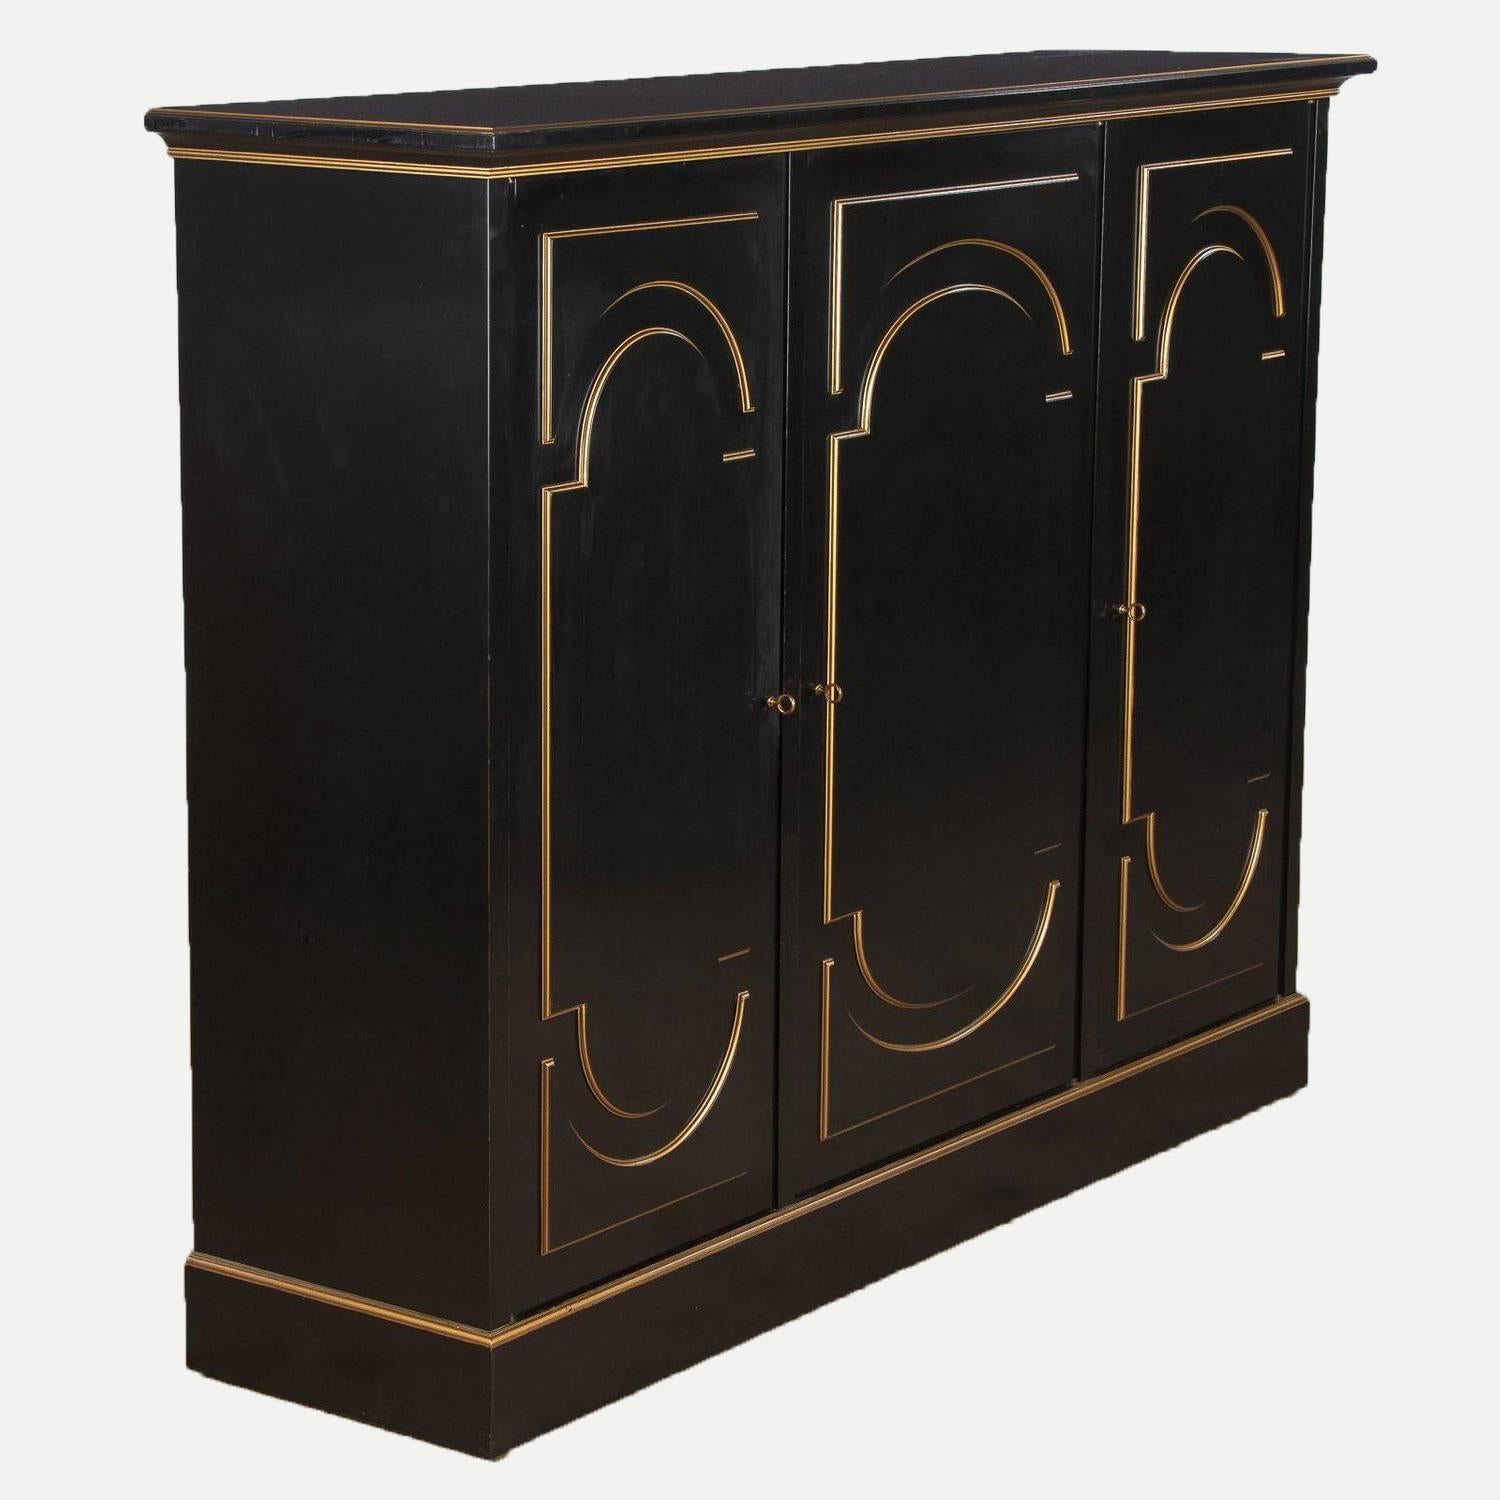 Varnished Neoclassical Maurice Hirsch Cabinet, 1950s